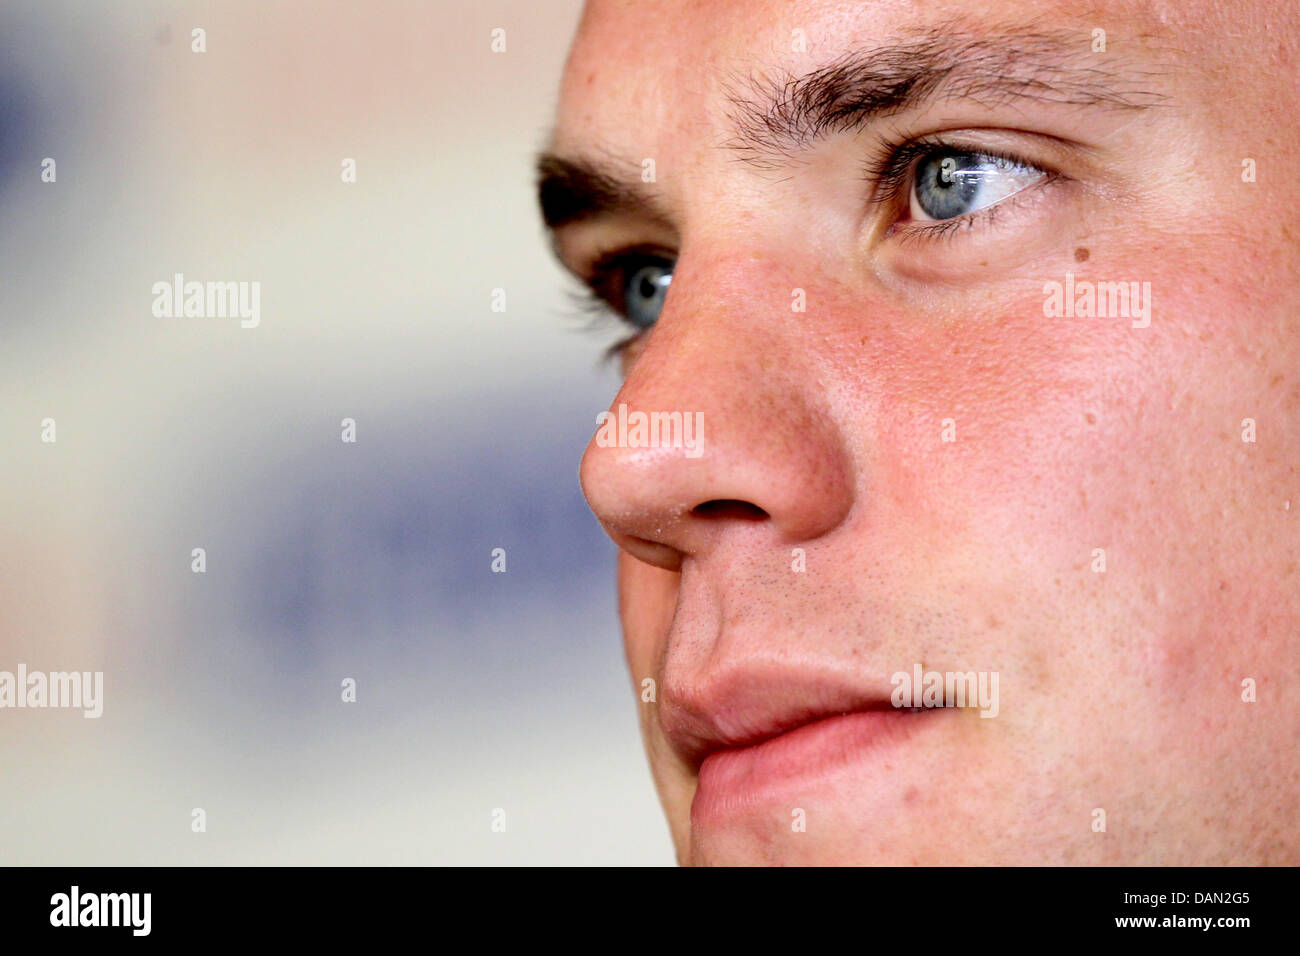 FC Bayern Munich's goalkeeper Manuel Neuer attends a press conference in Riva del Garda, Italy, 05 July 2011. From 03 to 09 July, the Bundesliga soccer club stays at Lake Garda for a training camp. Photo: Daniel Karmann Stock Photo